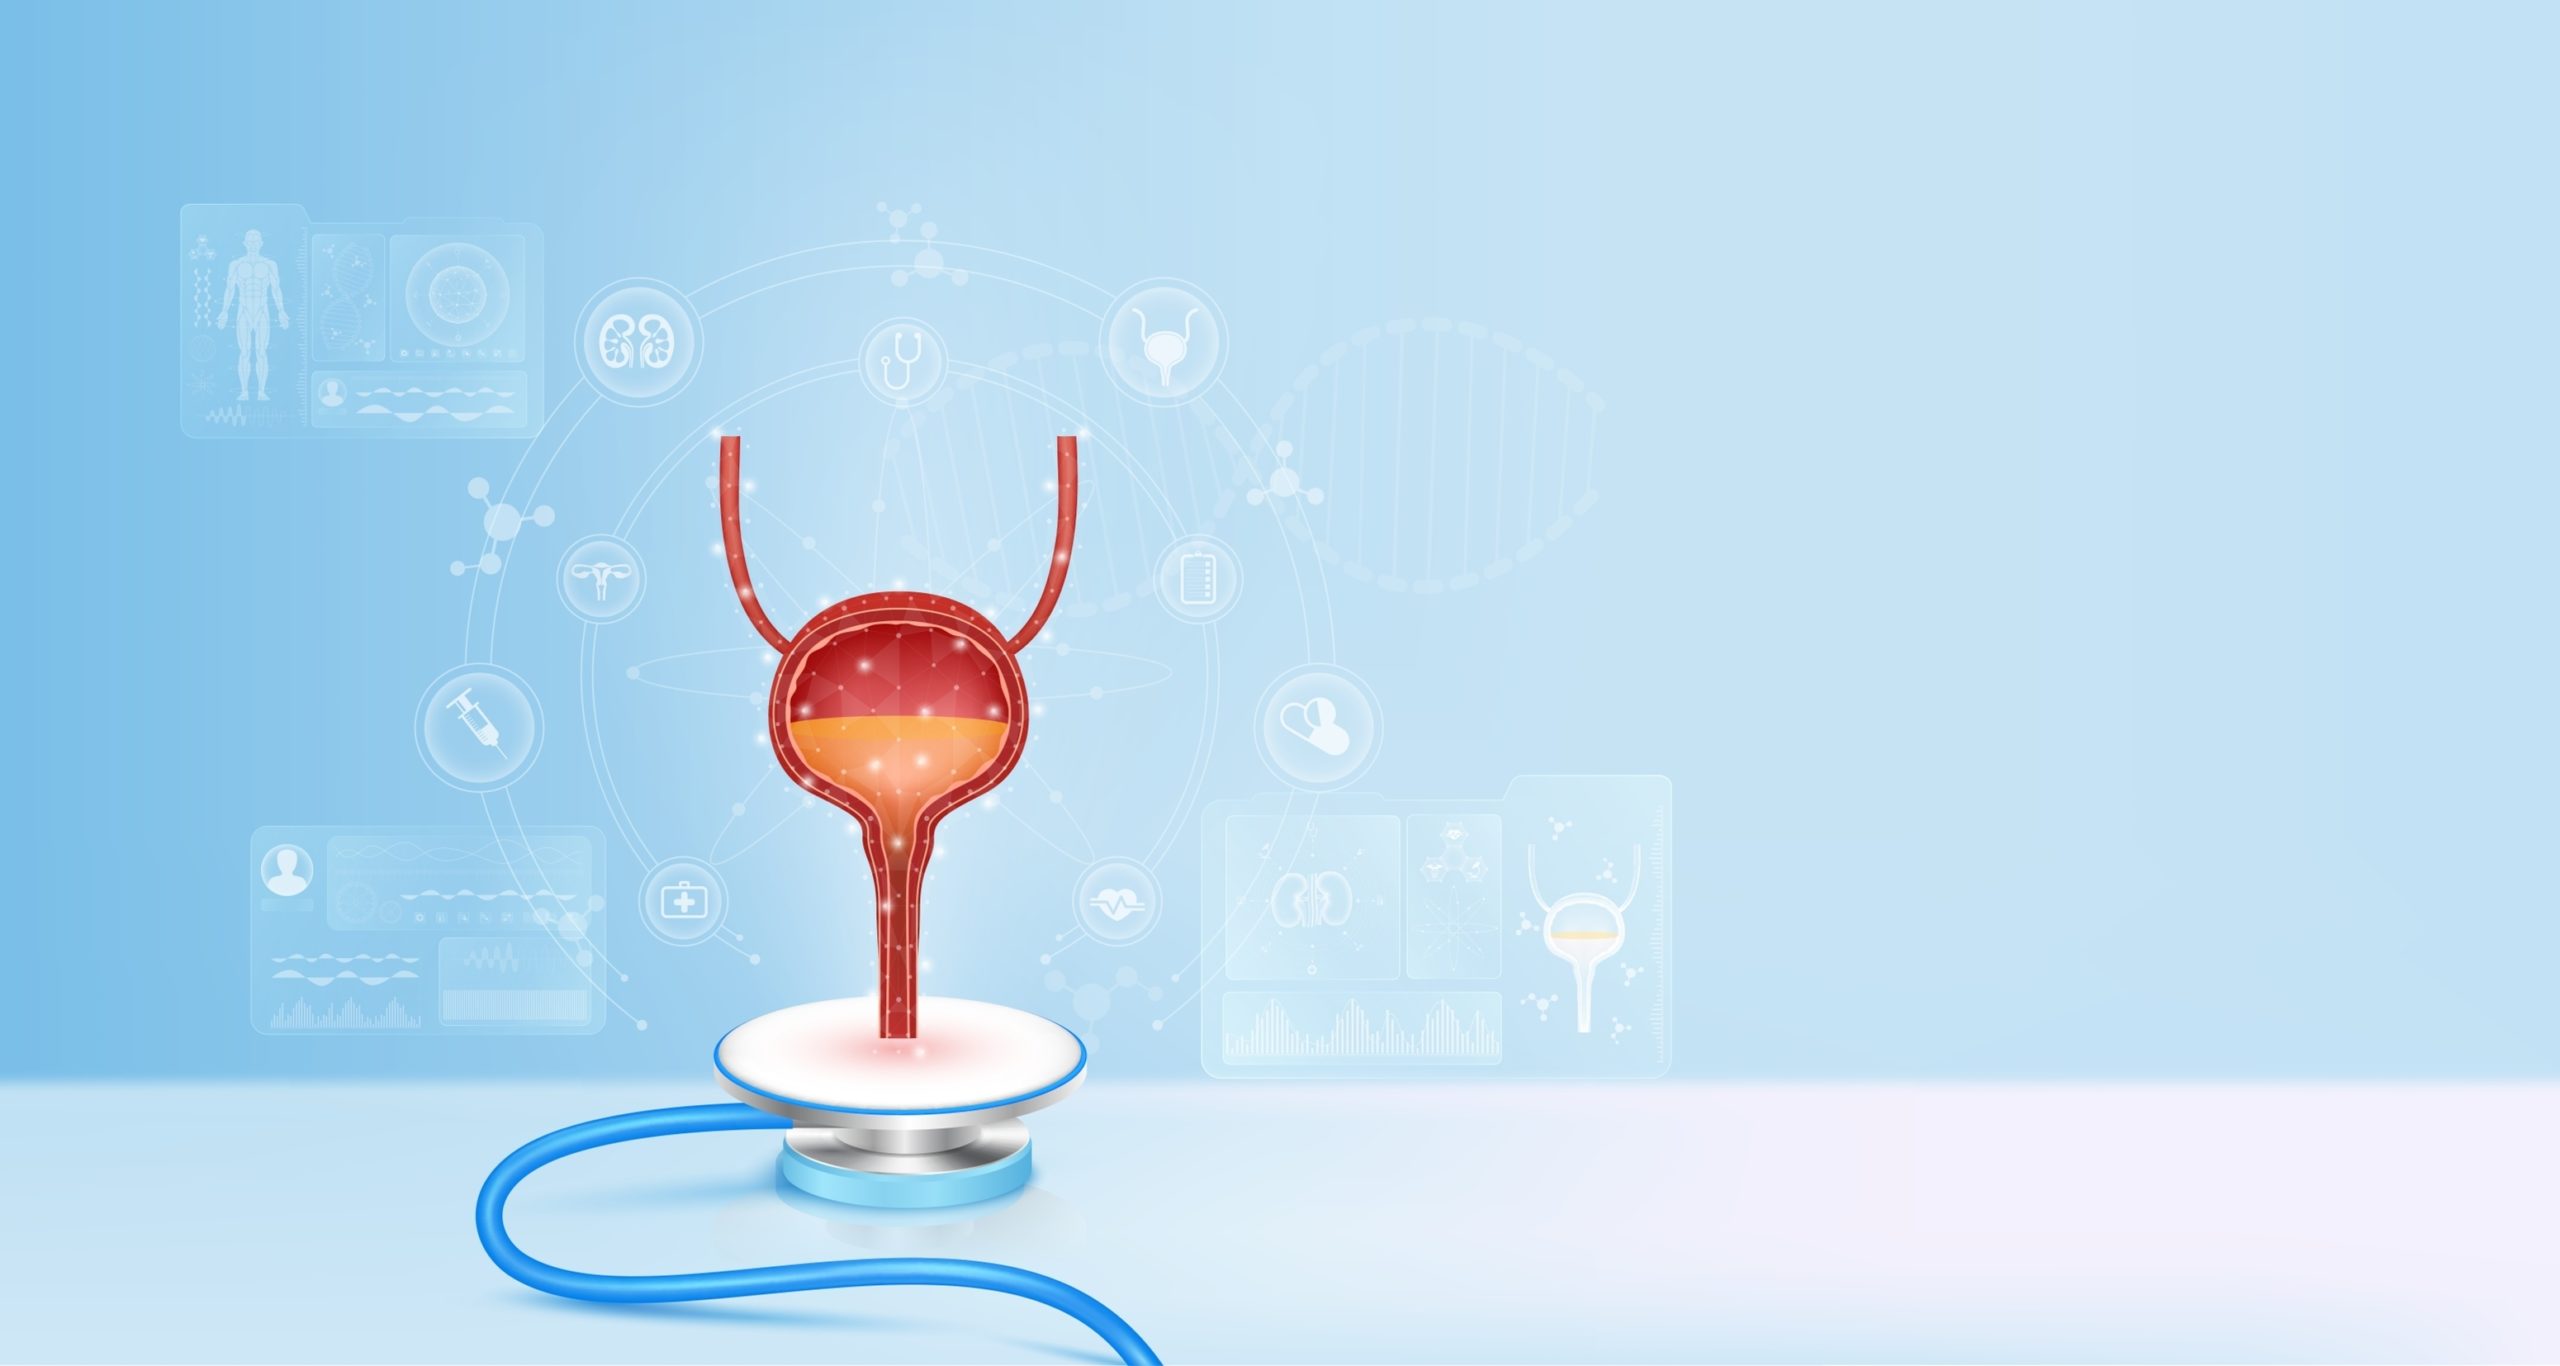 Human,Bladder,Float,Away,From,Stethoscope.,Medical,Icons,Image,Virtual